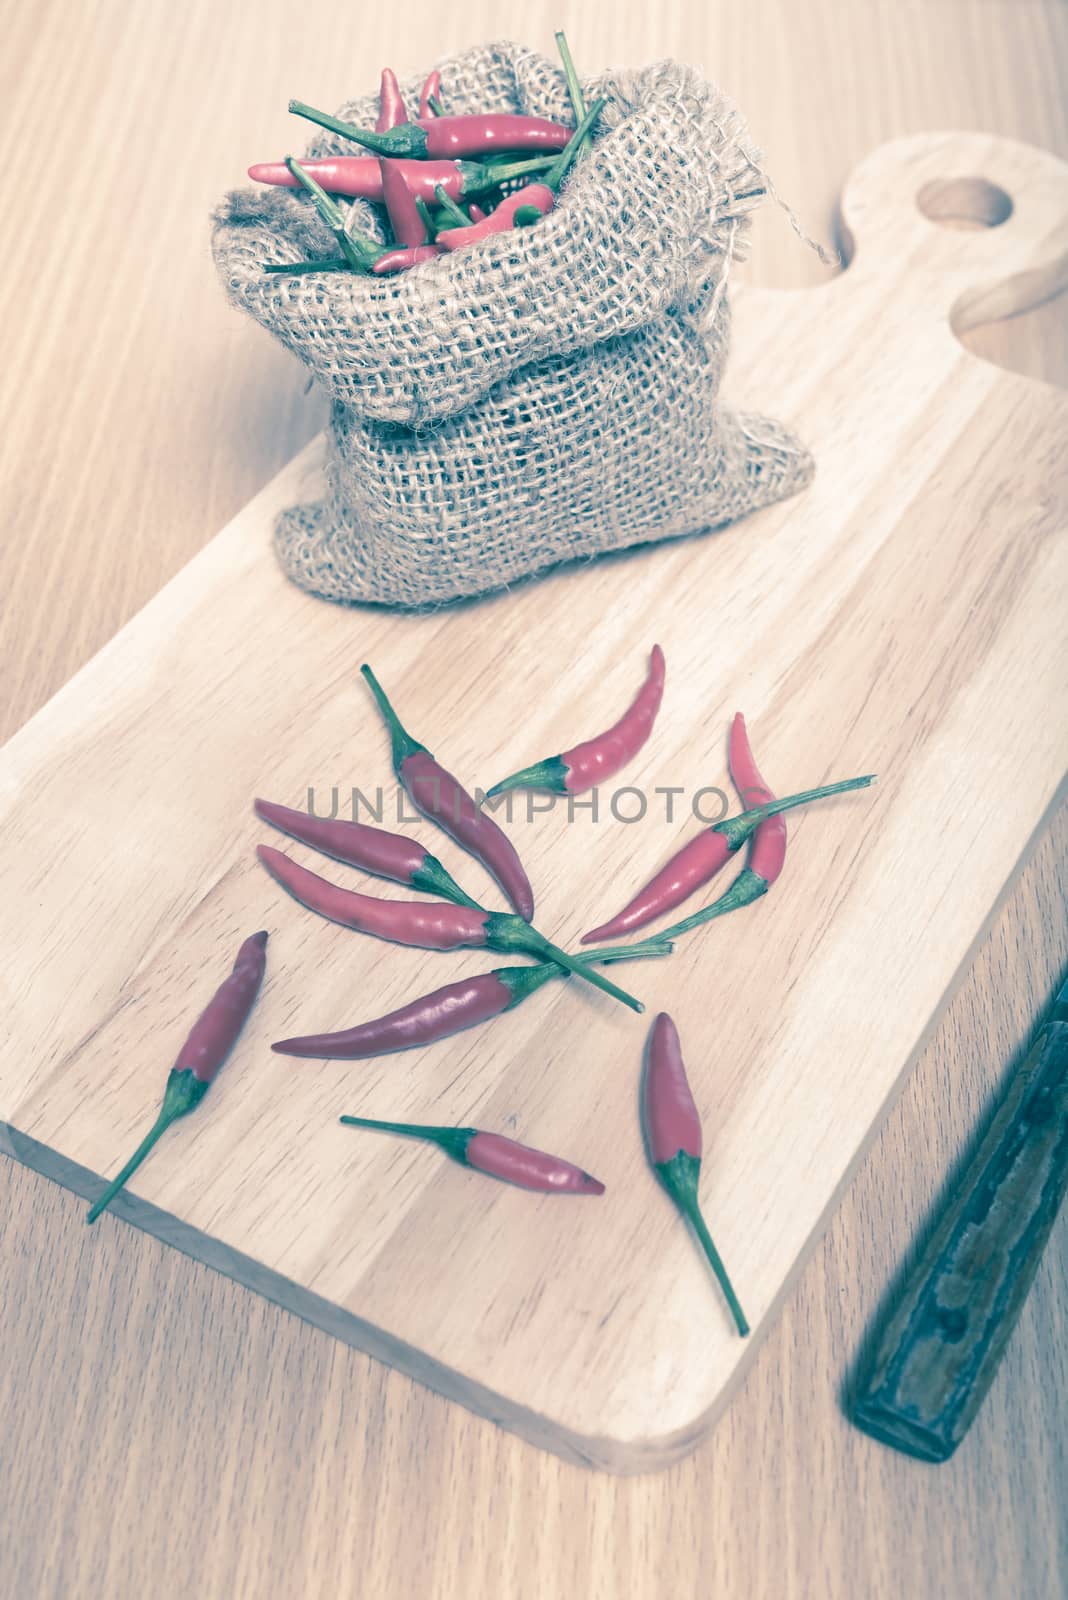 red chili peppers on cutting board over wood table background vintage style